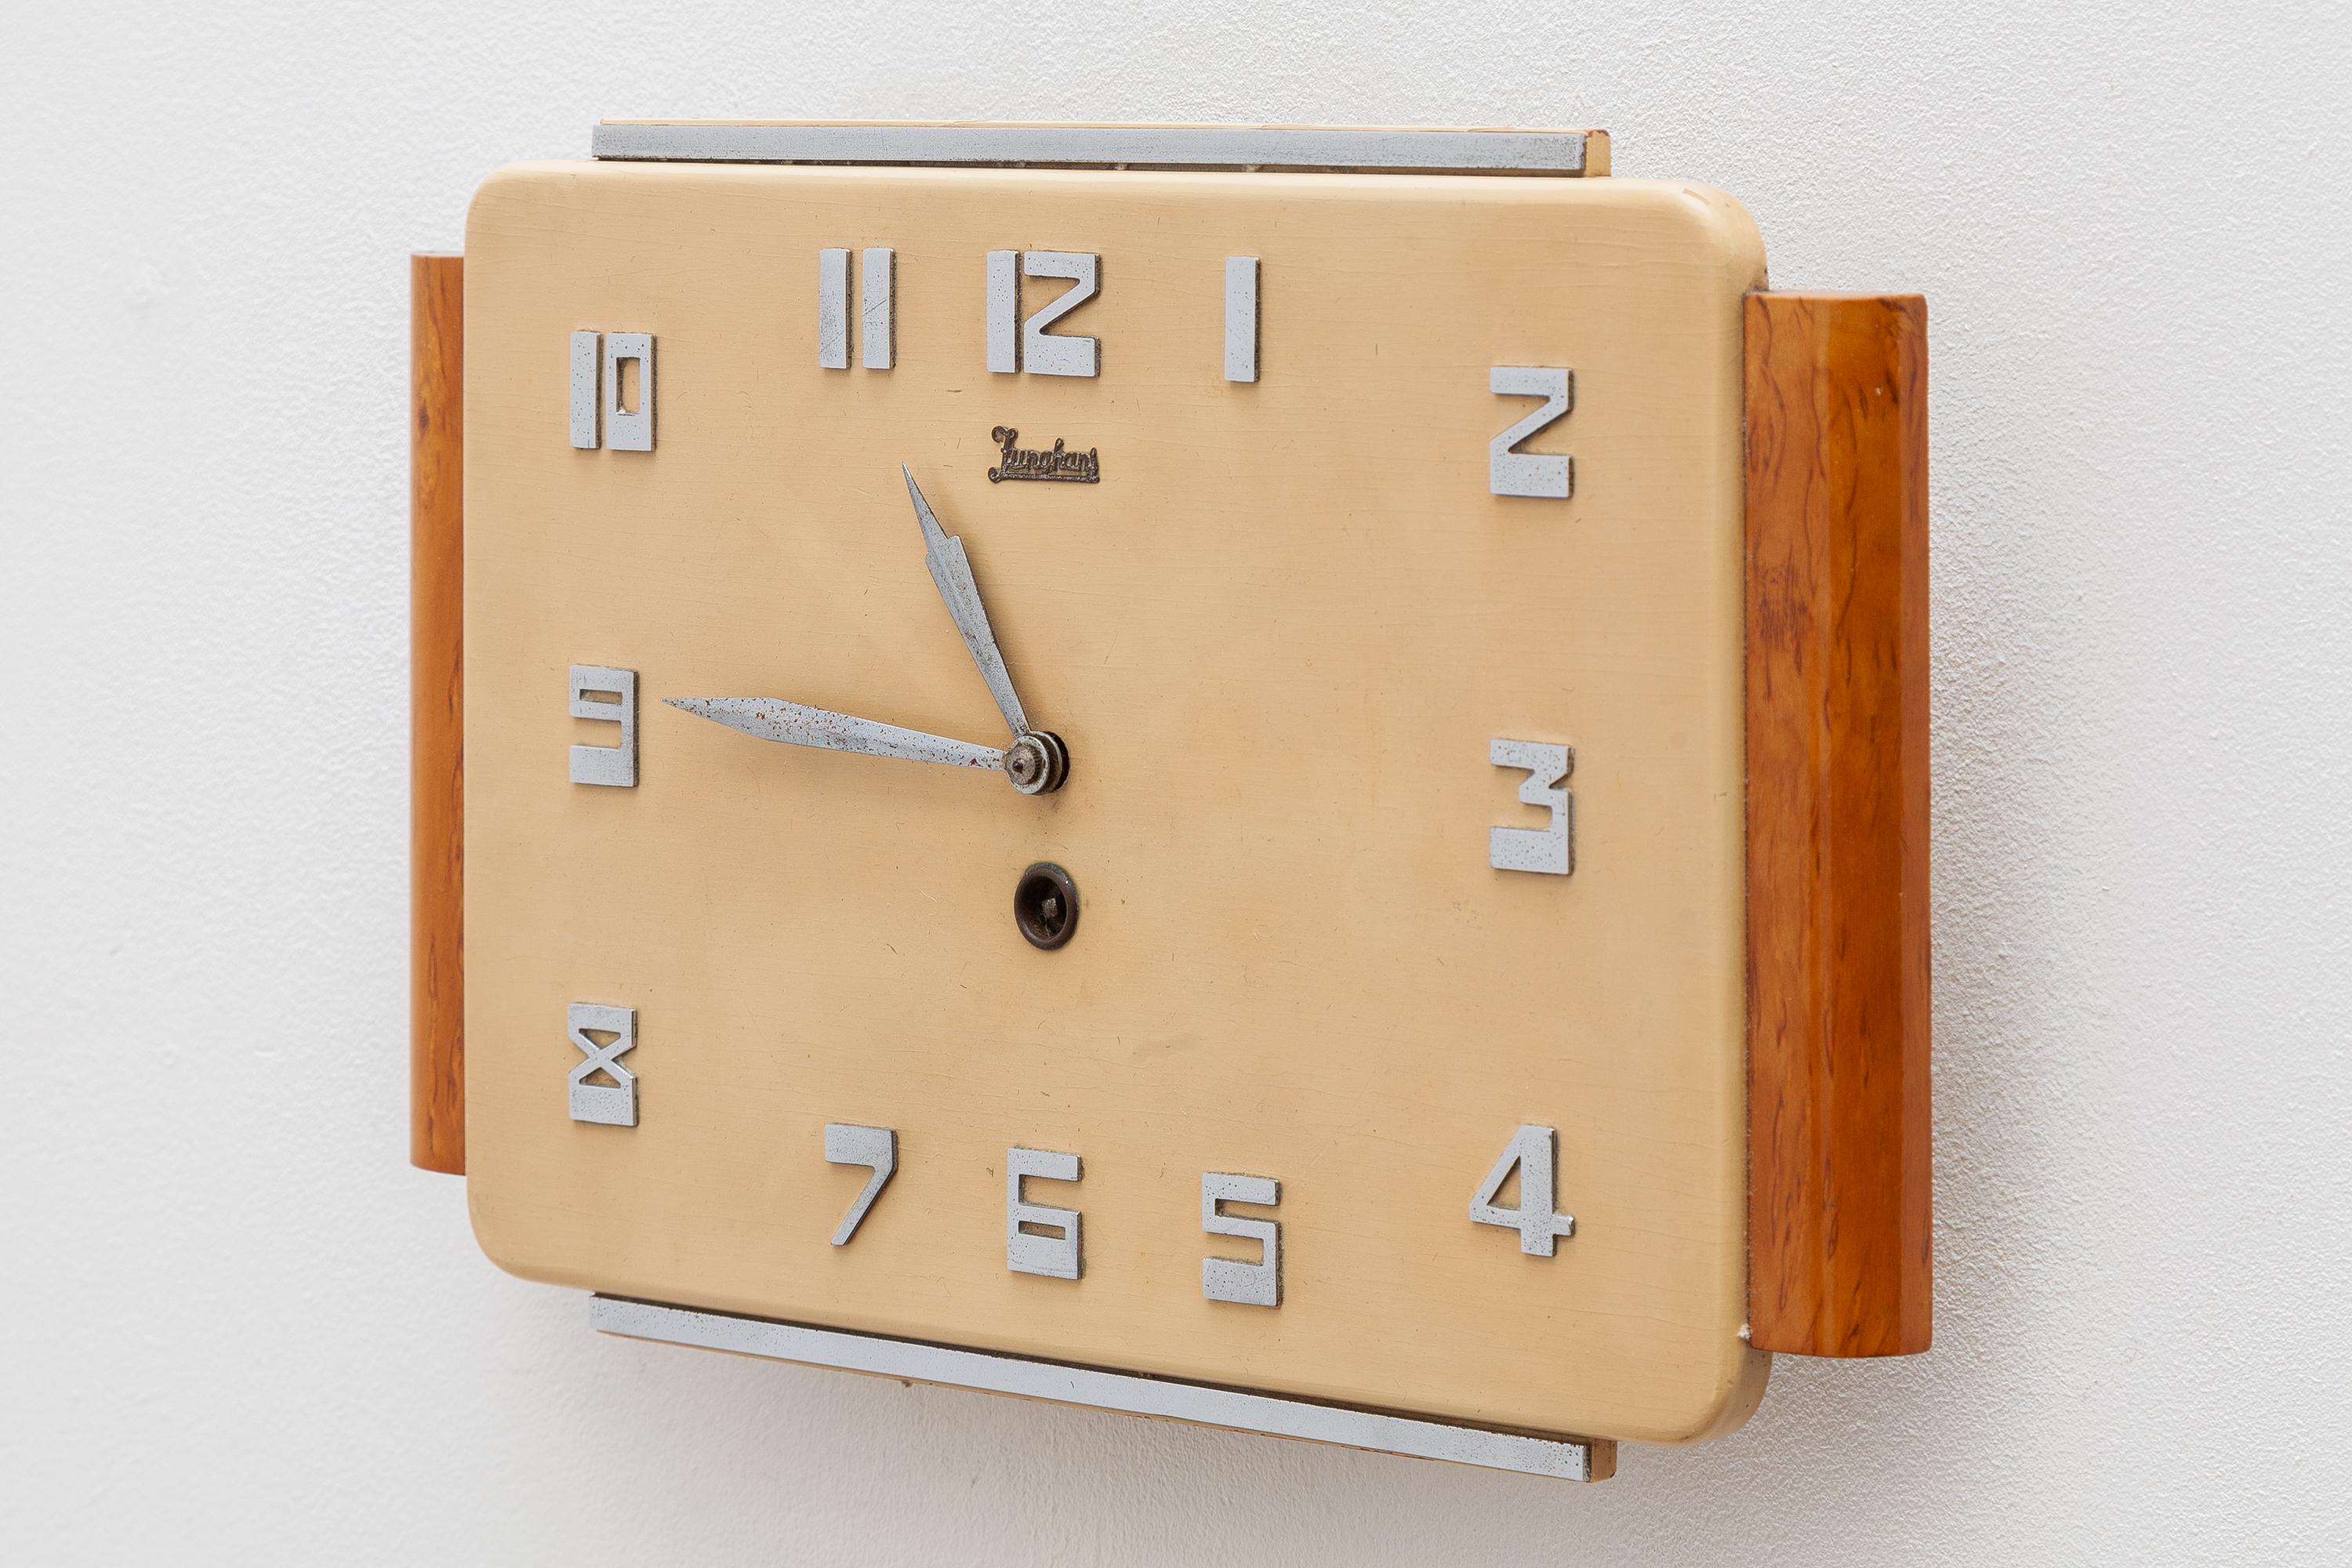 Art Deco wall clock by famed German watch and clockmaker, Junghans. In wood, celluloid and chrome elements.
Dimensions: 32 W x 20 H x 5 D cm.
Working good condition.